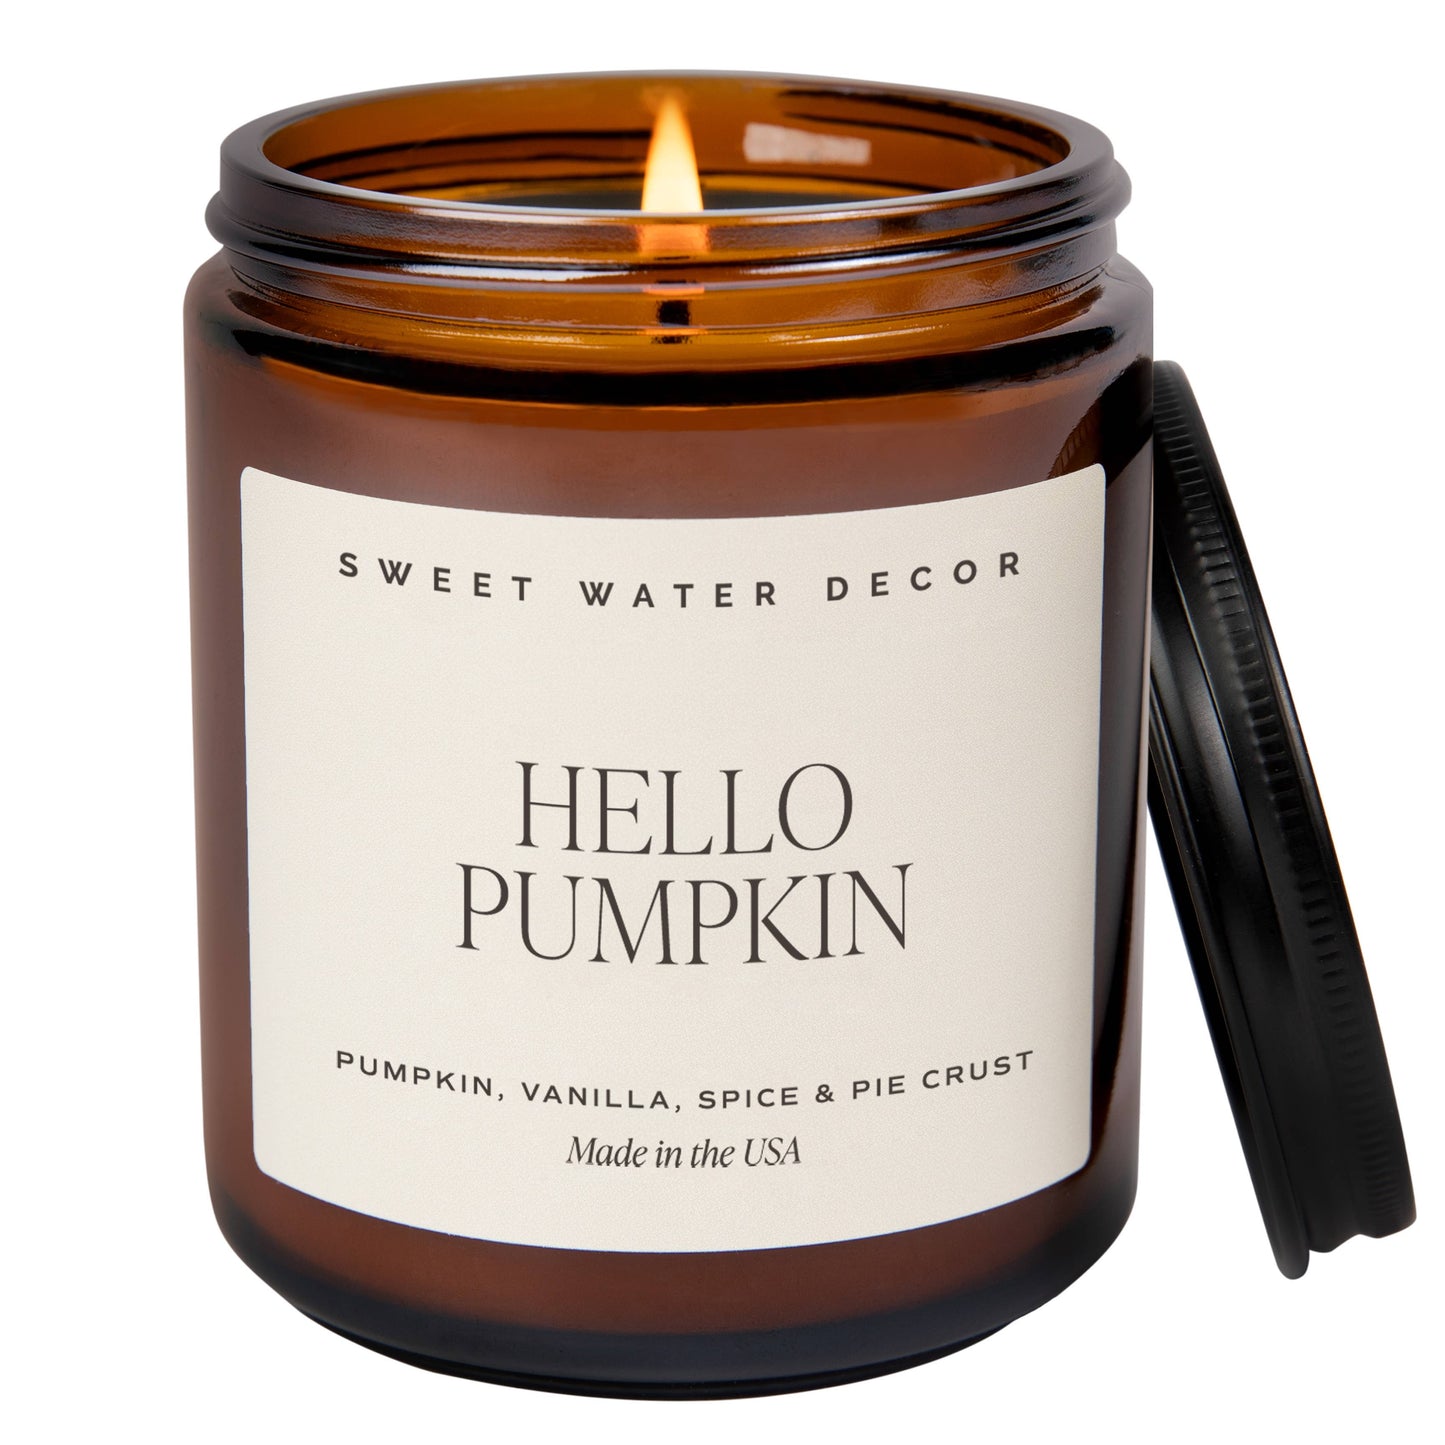 Sweet Water Decor - Hello Pumpkin 9 oz Soy Candle - Fall Home Decor & Gifts